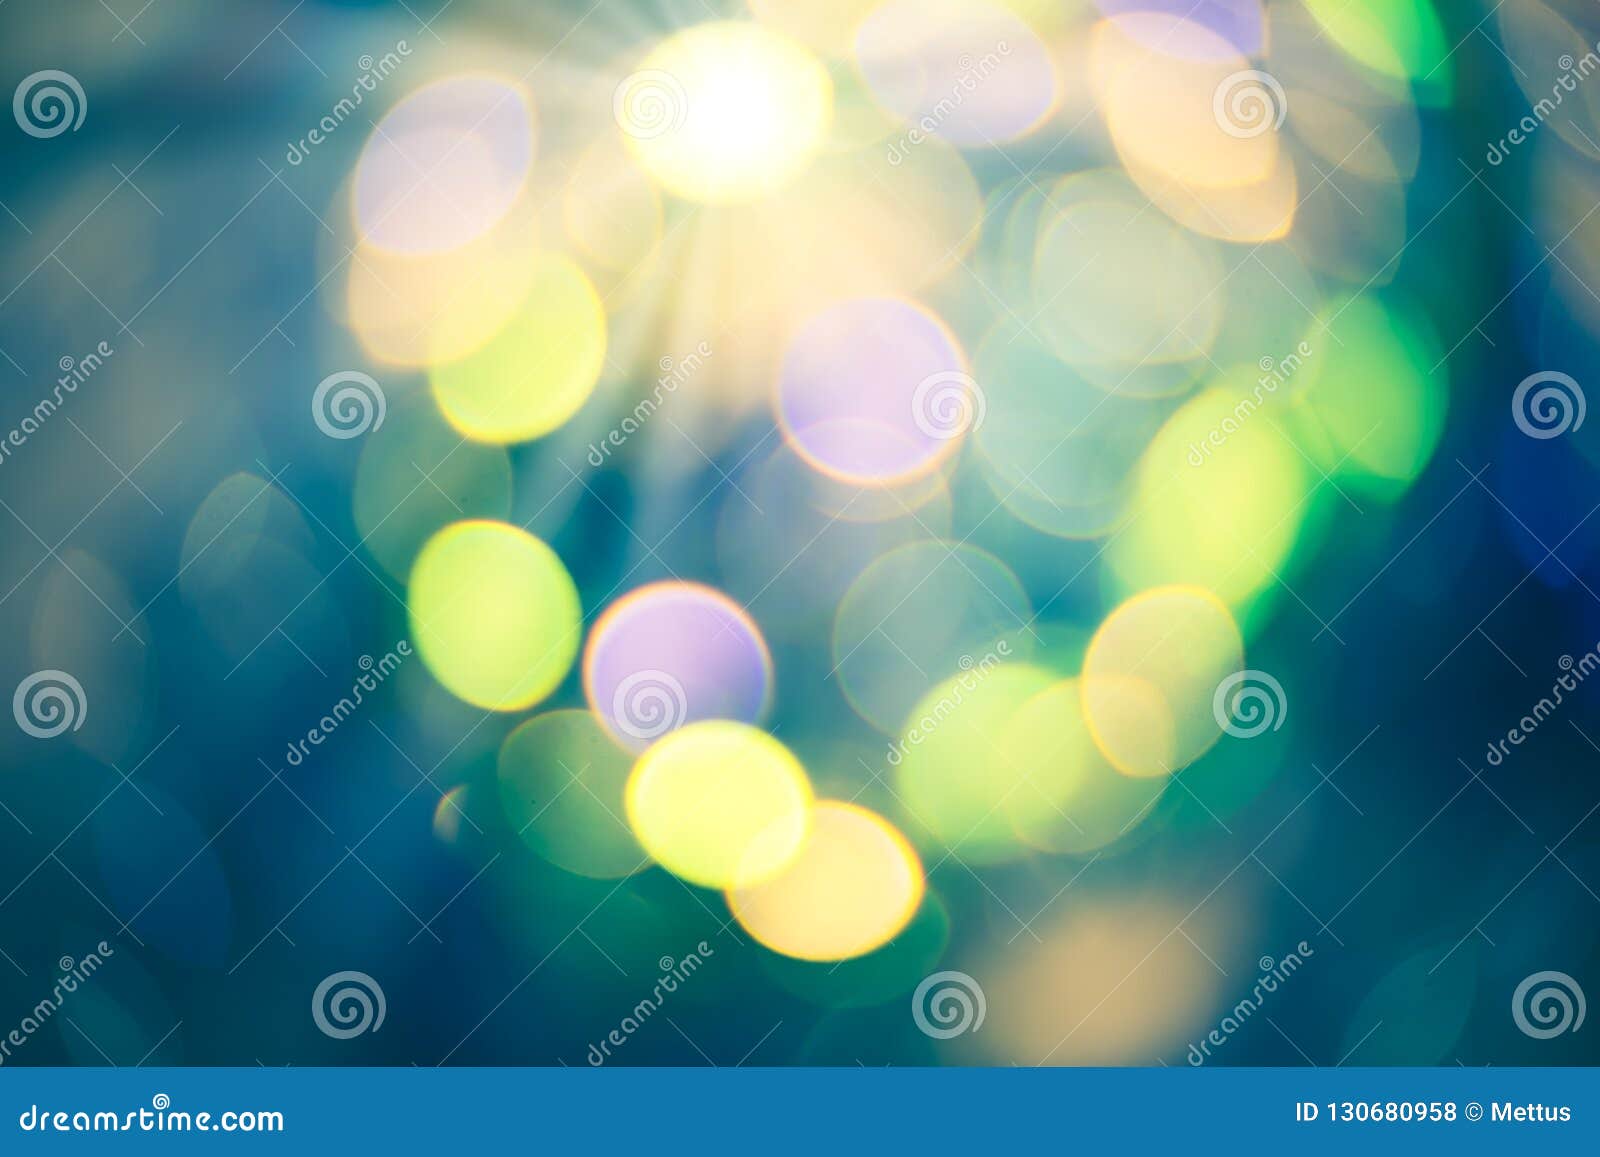 Abstract Blurred Circles Bokeh Lights Colorful Bokeh Background Stock